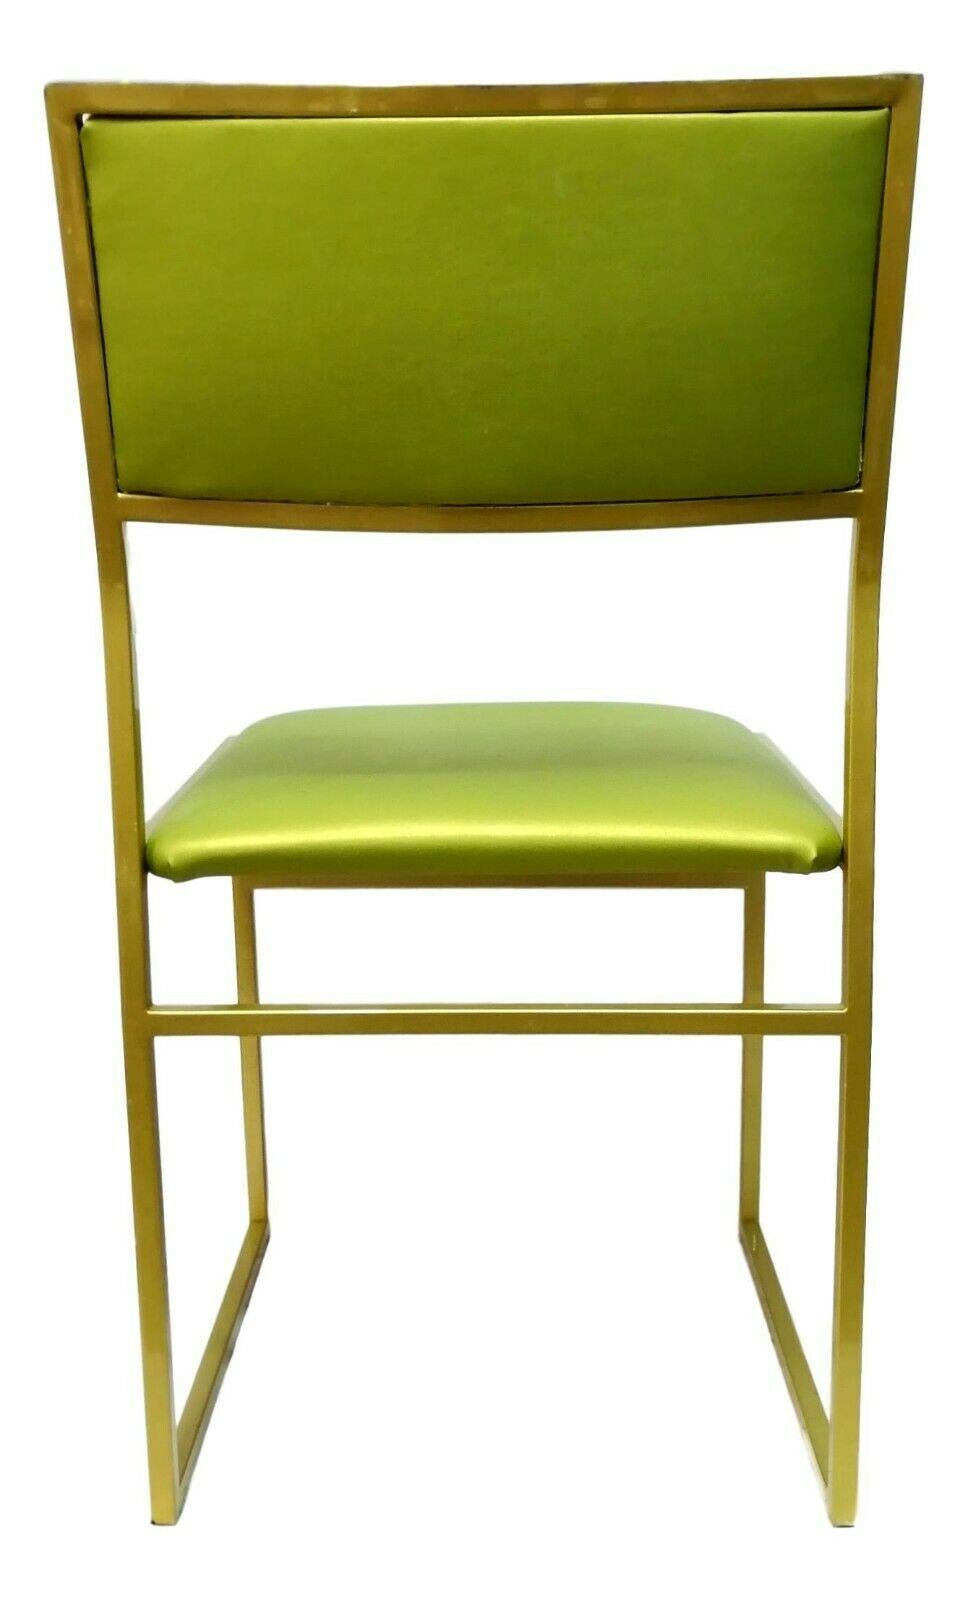 original design chair from the 70s, made with a golden lacquered metal frame, seat and back upholstered in green skay or chintz

Measures 78 cm in height, 42 cm in width, 50 cm in depth and 45 cm in height of the seat from the ground in very good